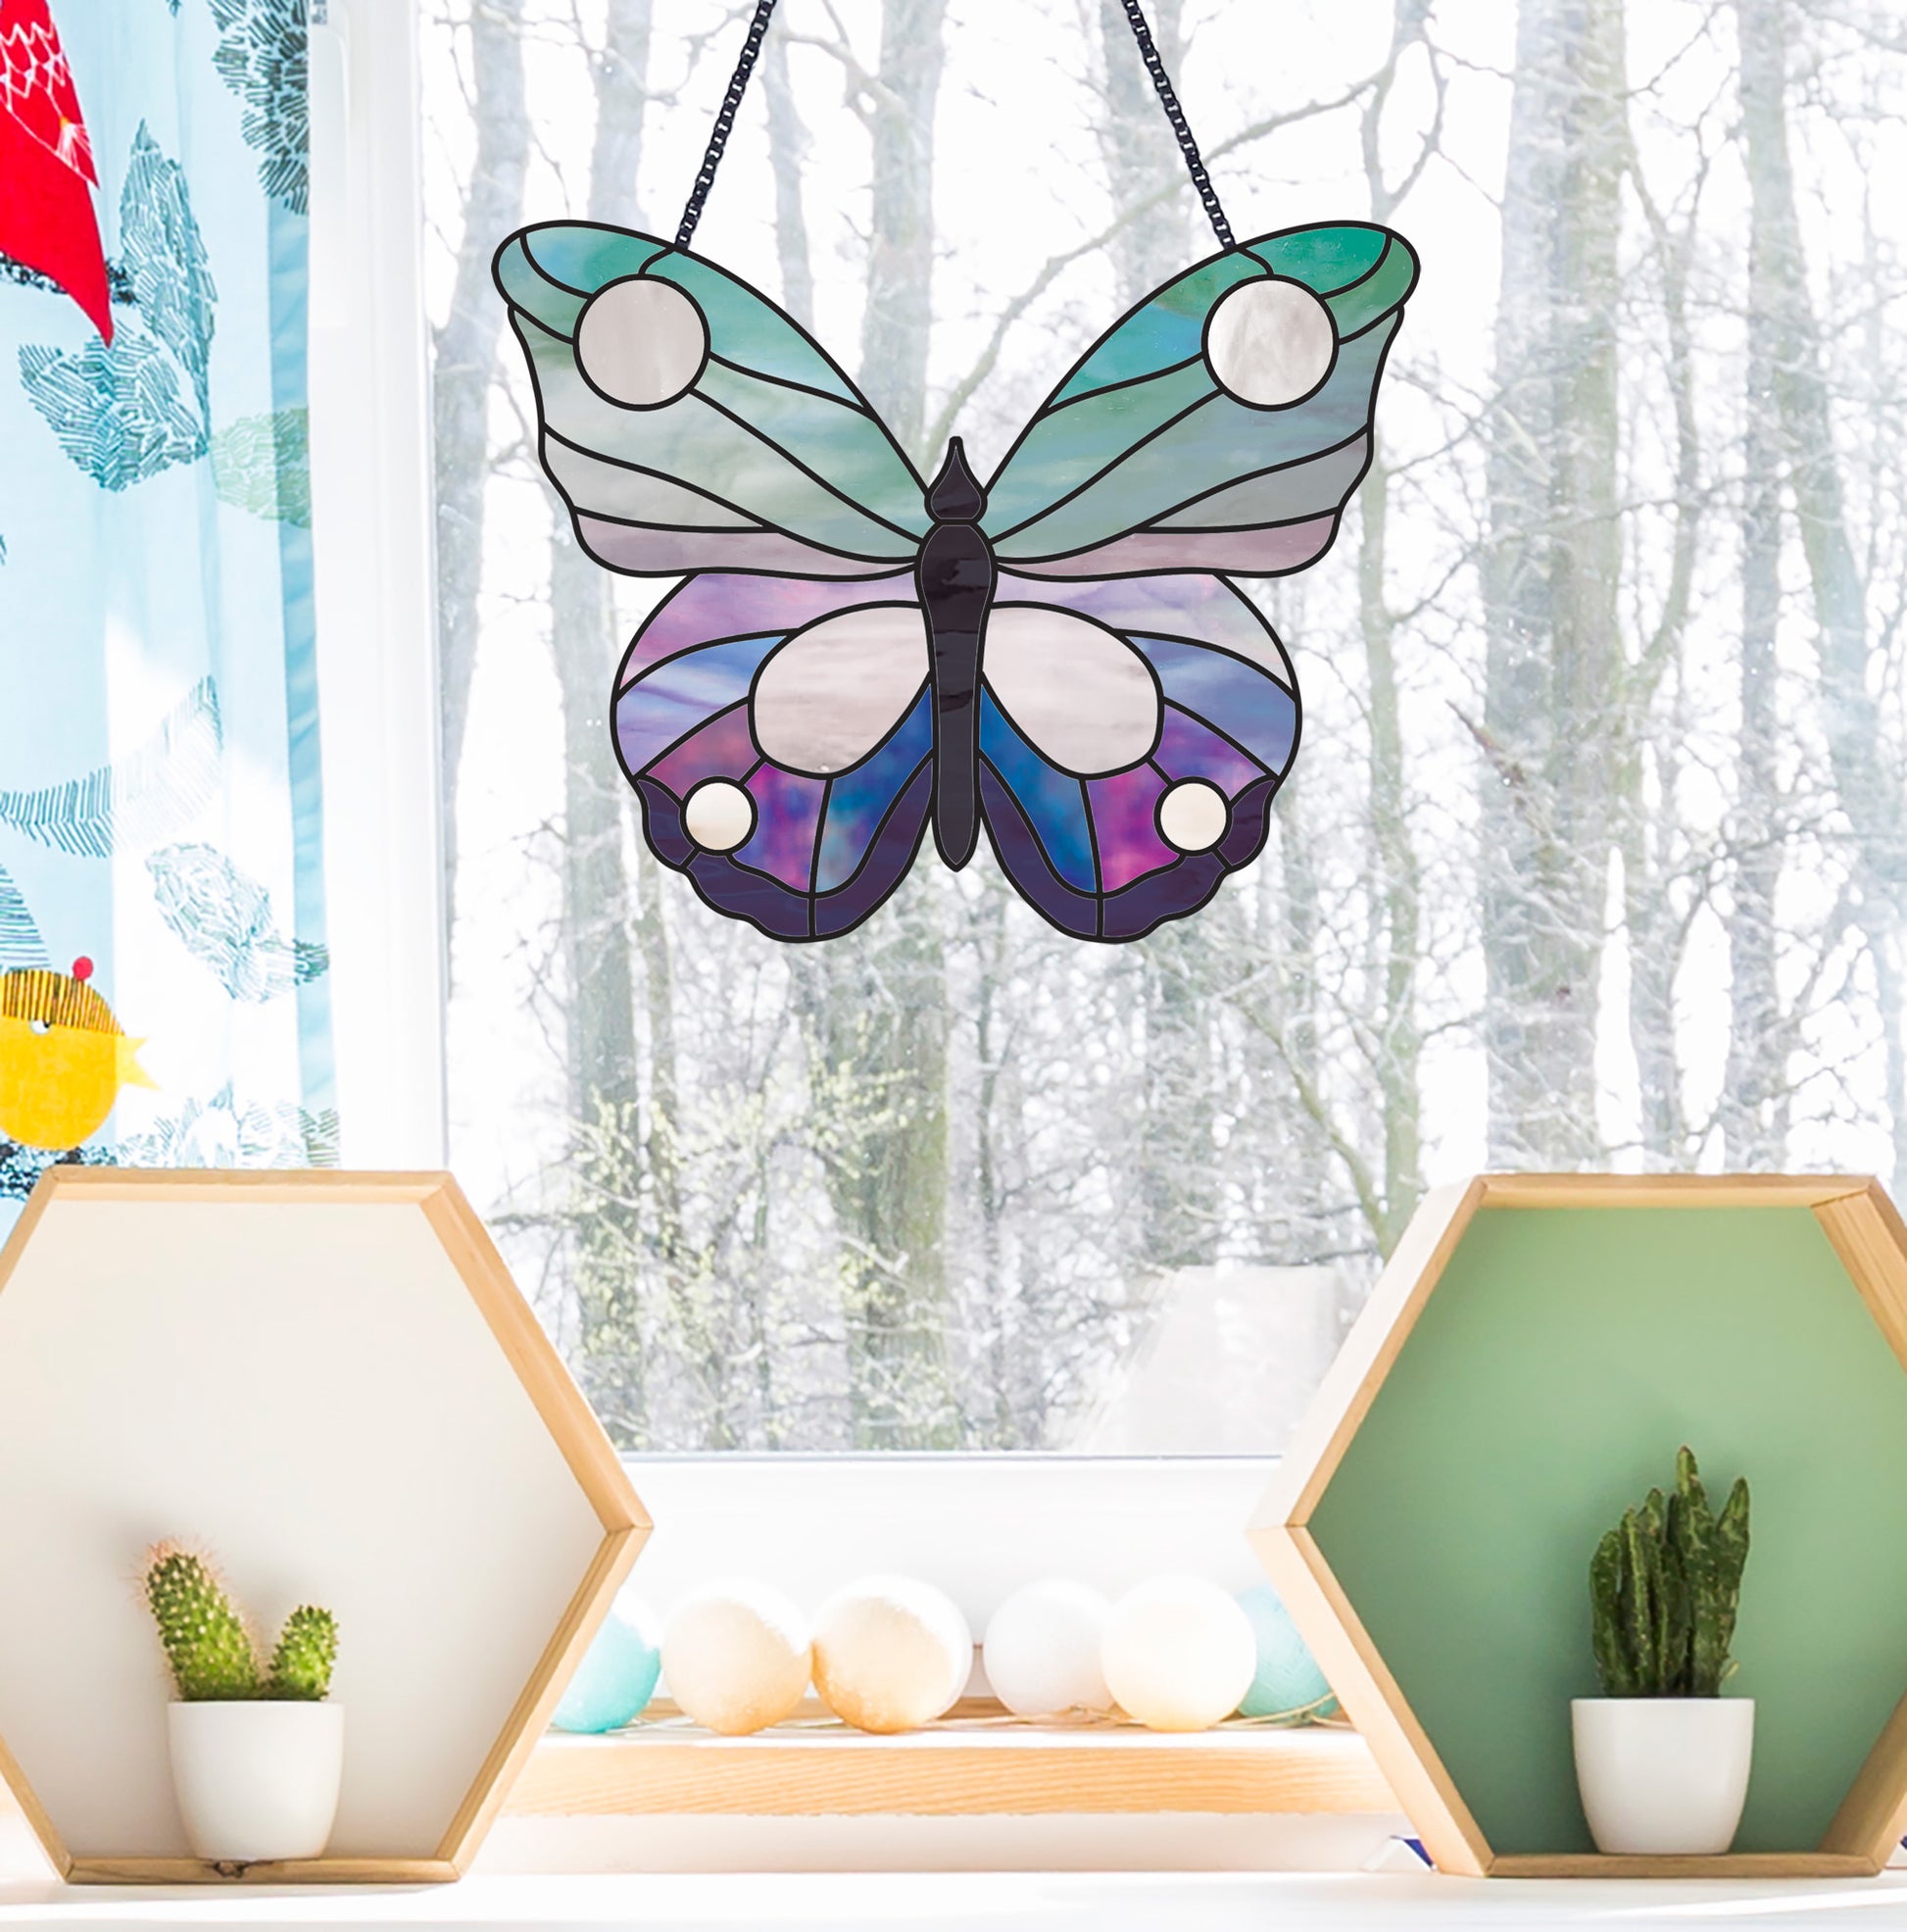 Butterfly stained glass patterns, pack of four, instant download, one butterfly shown in window with winter background